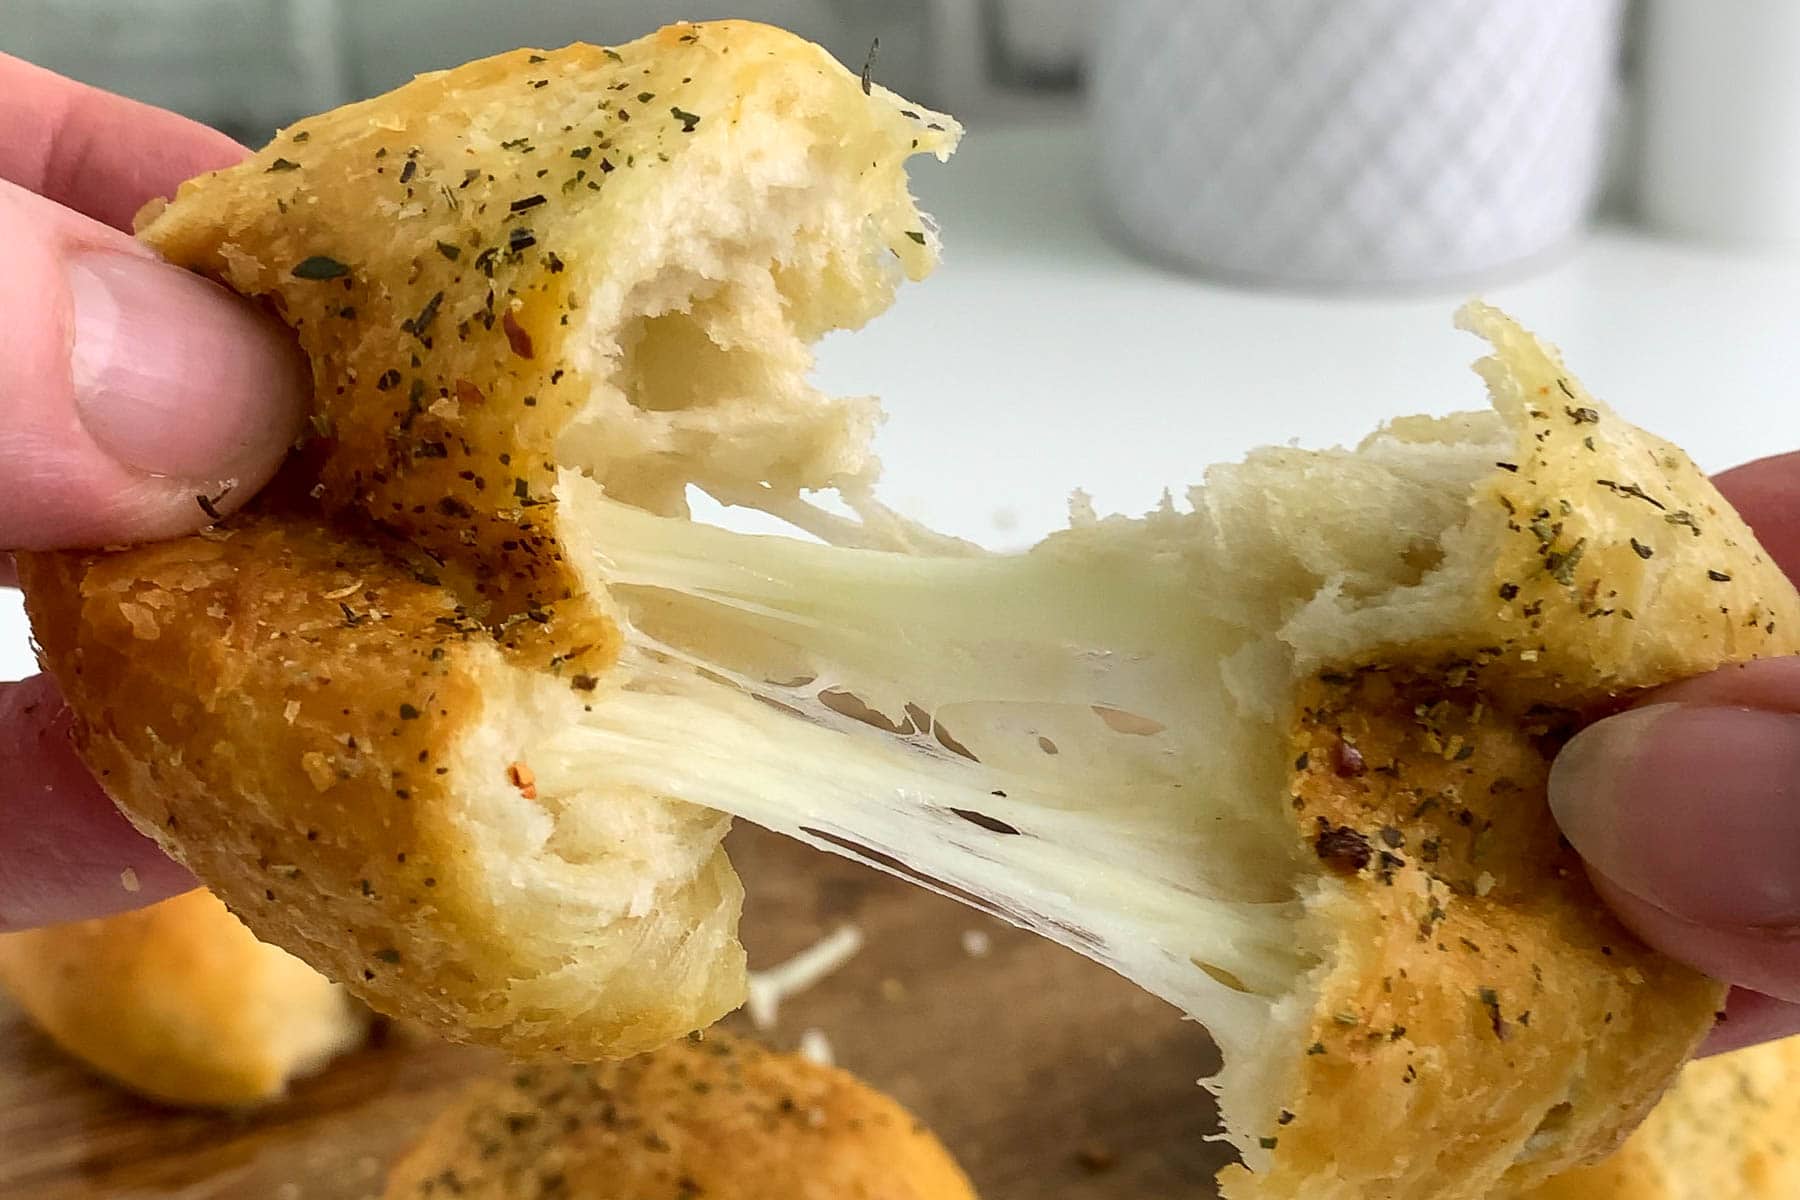 Pulling apart a garlic cheese ball filled with stringy mozzarella cheese.